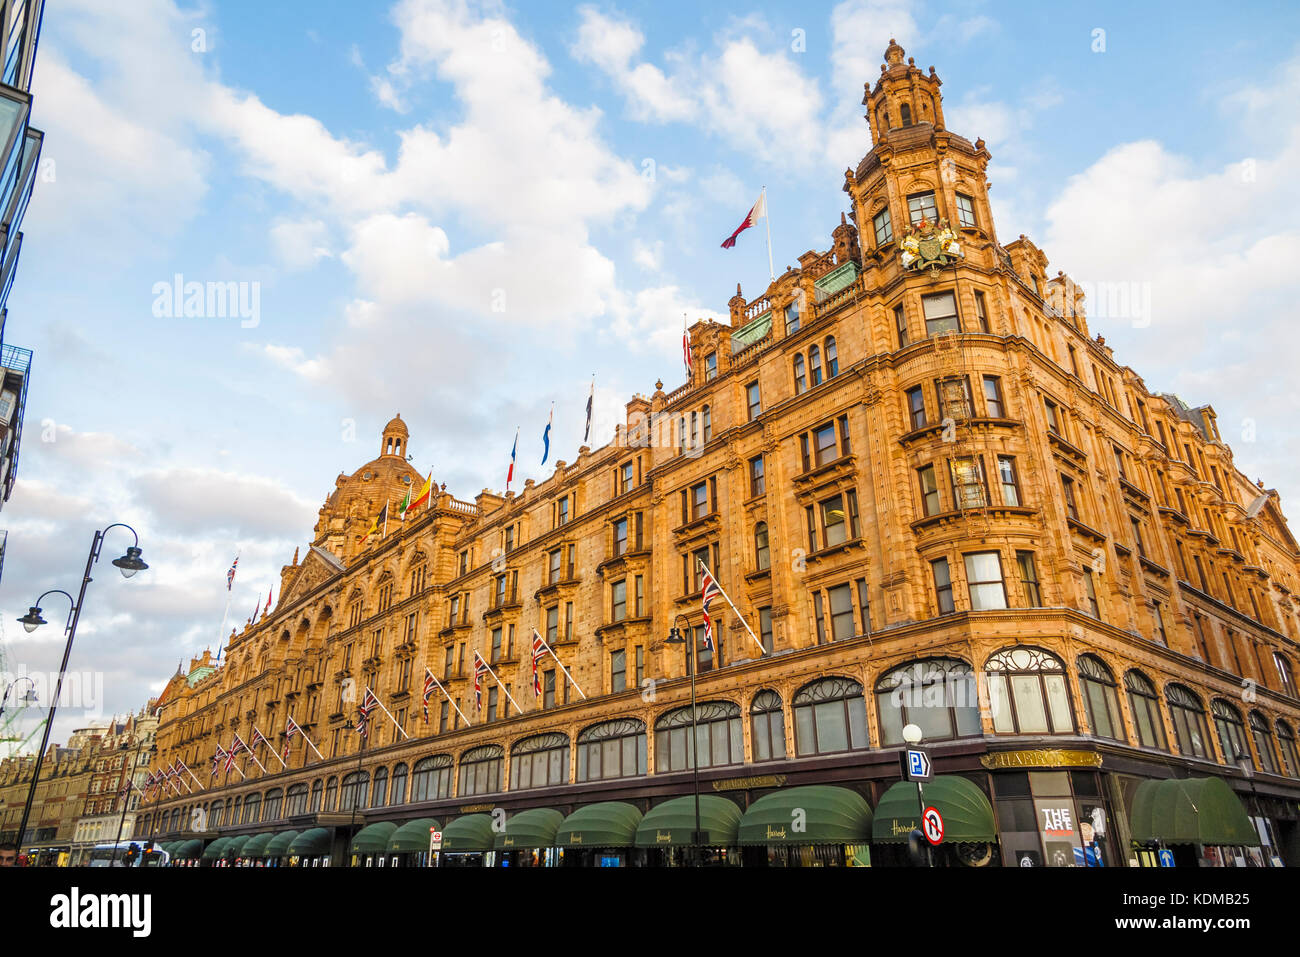 Exterior of Harrods, the luxury department store on Brompton Road in Knightsbridge, Royal Borough of Kensington and Chelsea, London SW1 Stock Photo